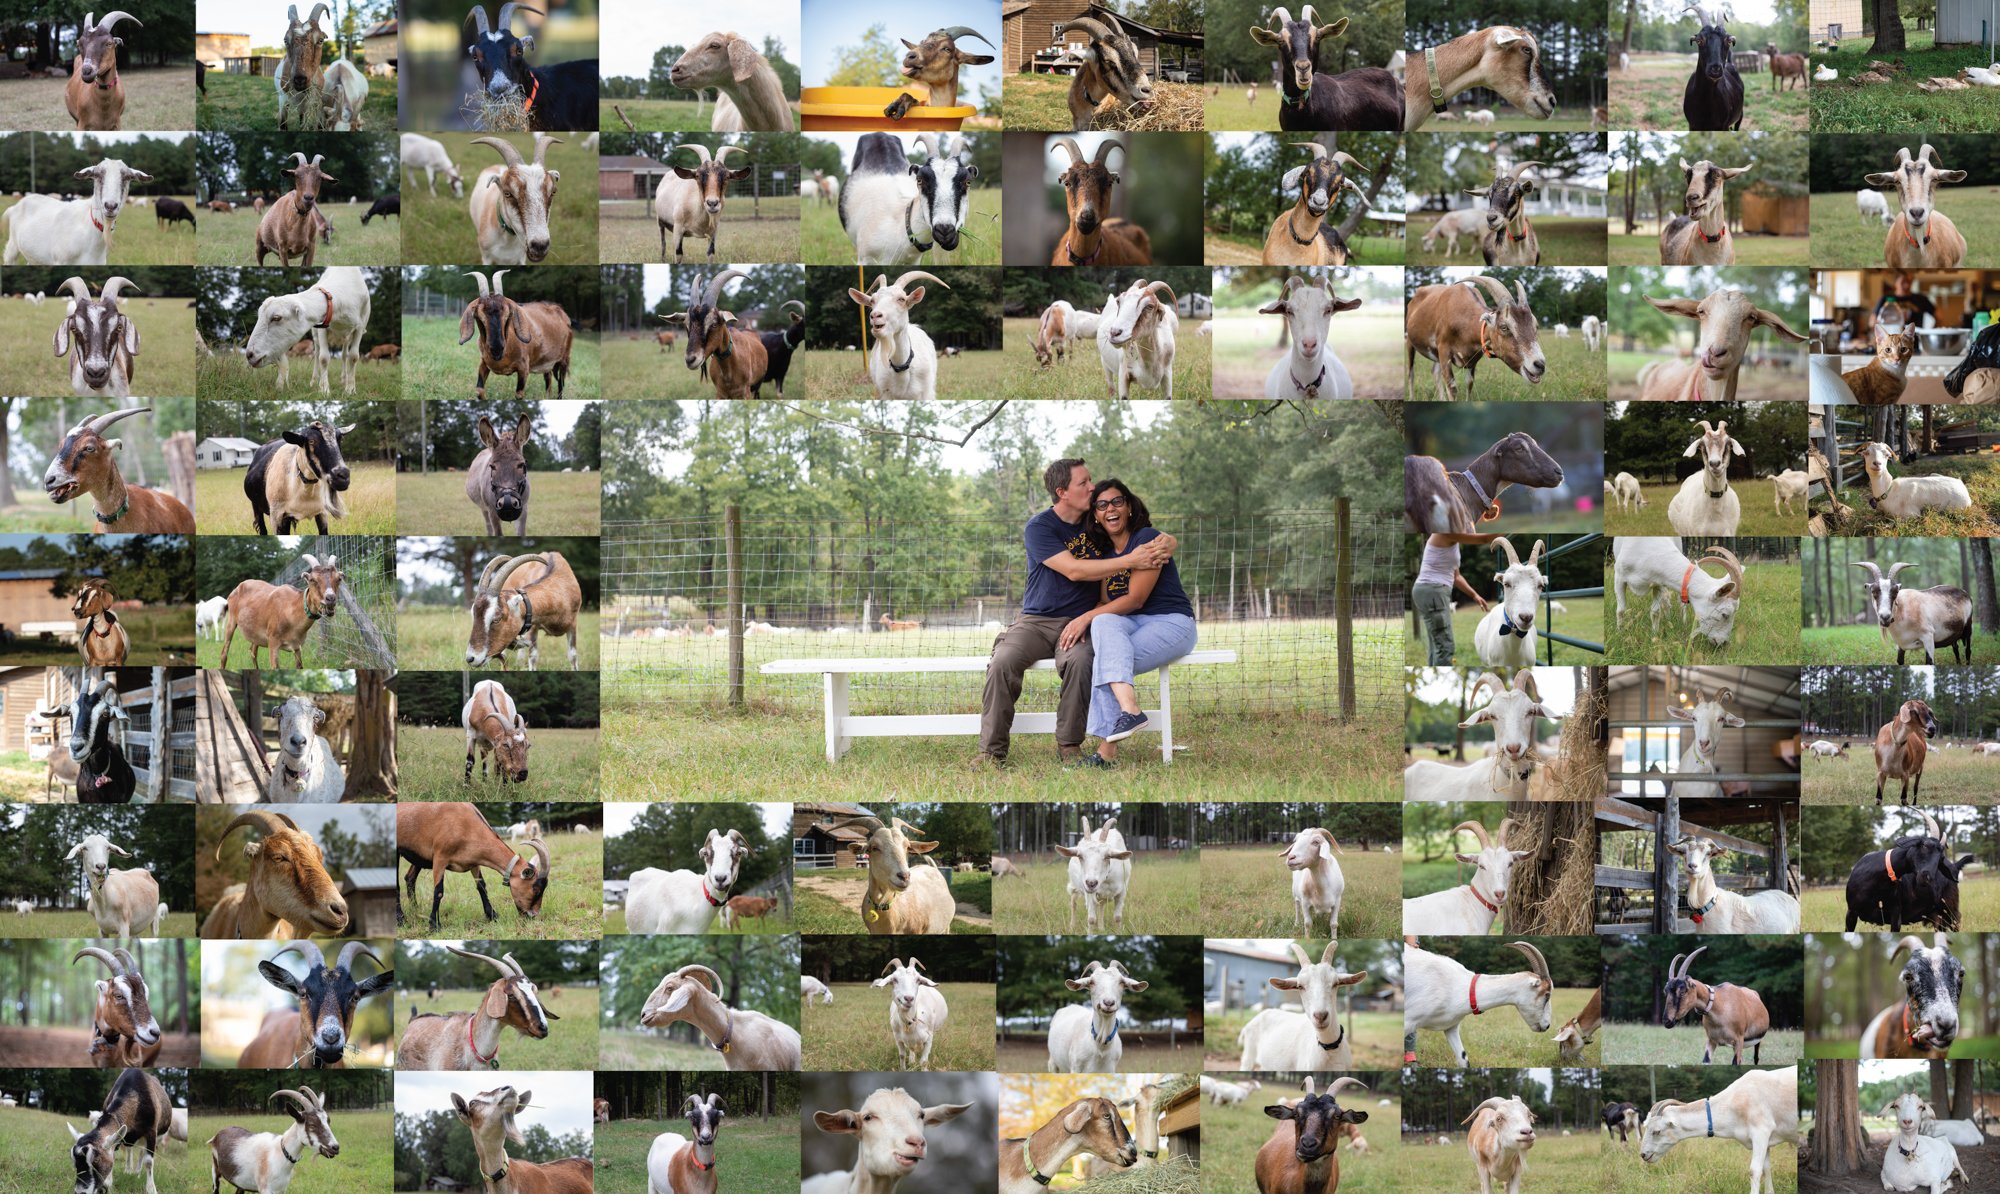  Domville and Vergara are able to identify each of their goats in addition to their cats, ducks, and donkeys.    “We want to have a child one day, maybe not now, but once we feel more stable to do so. But for now, we have our family,” said Vergara. 